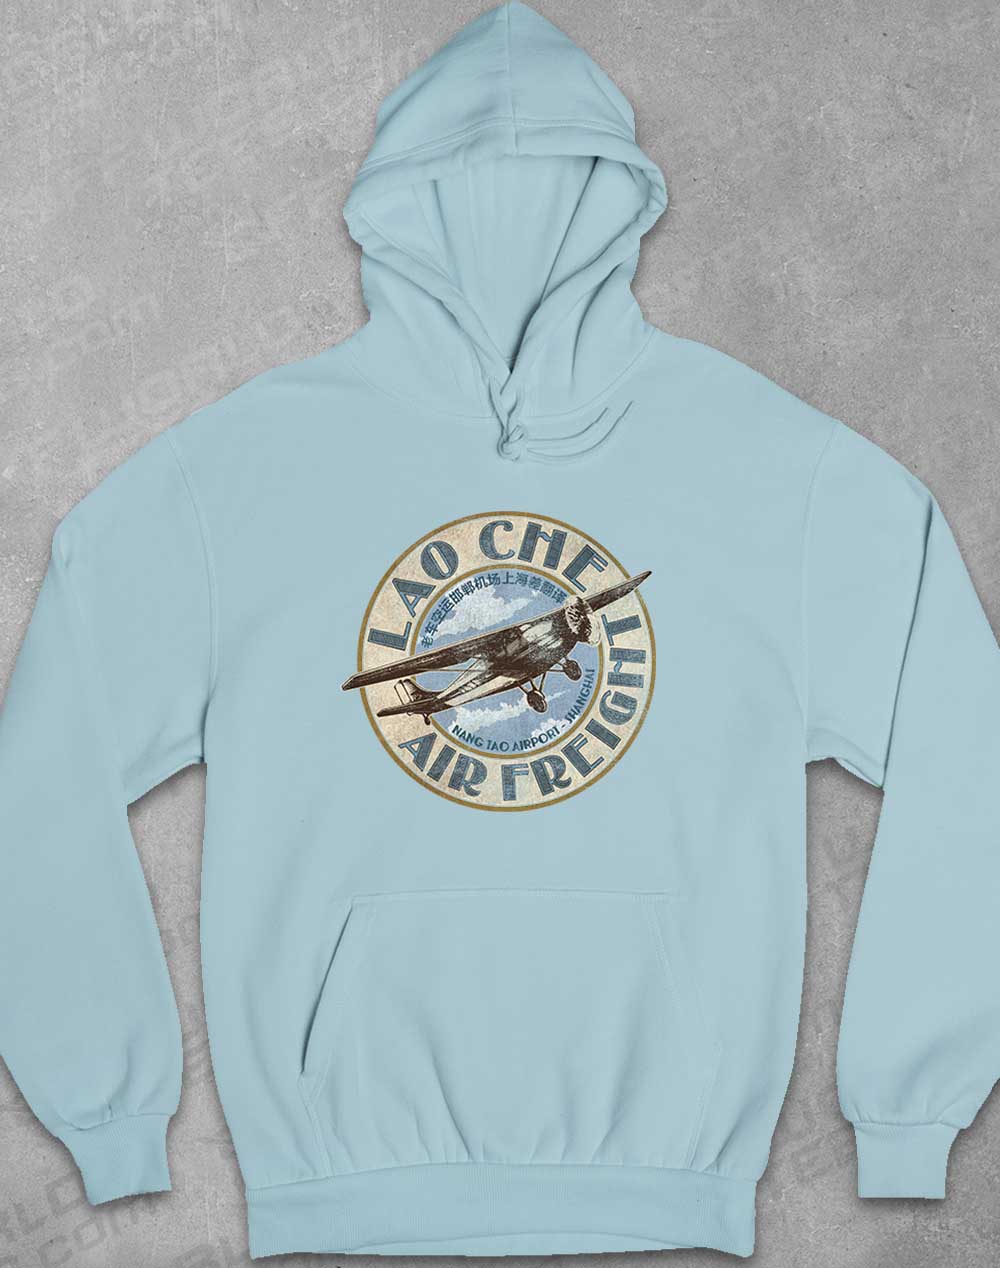 Sky Blue - Lao Che Air Freight Hoodie